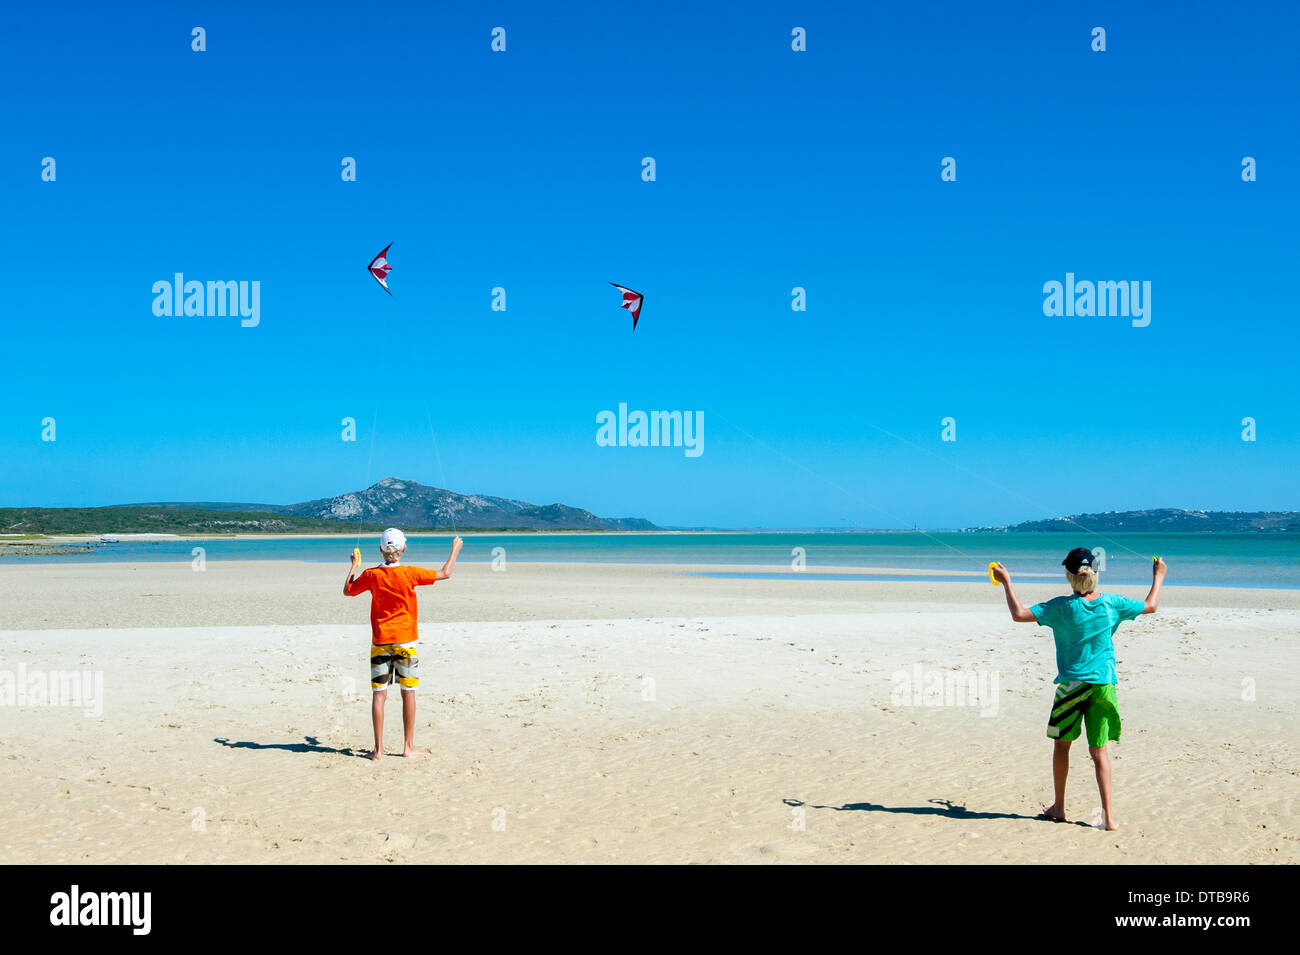 Two boys flying kites on the beach of a lagoon, Churchhaven, Western Cape, South Africa Stock Photo